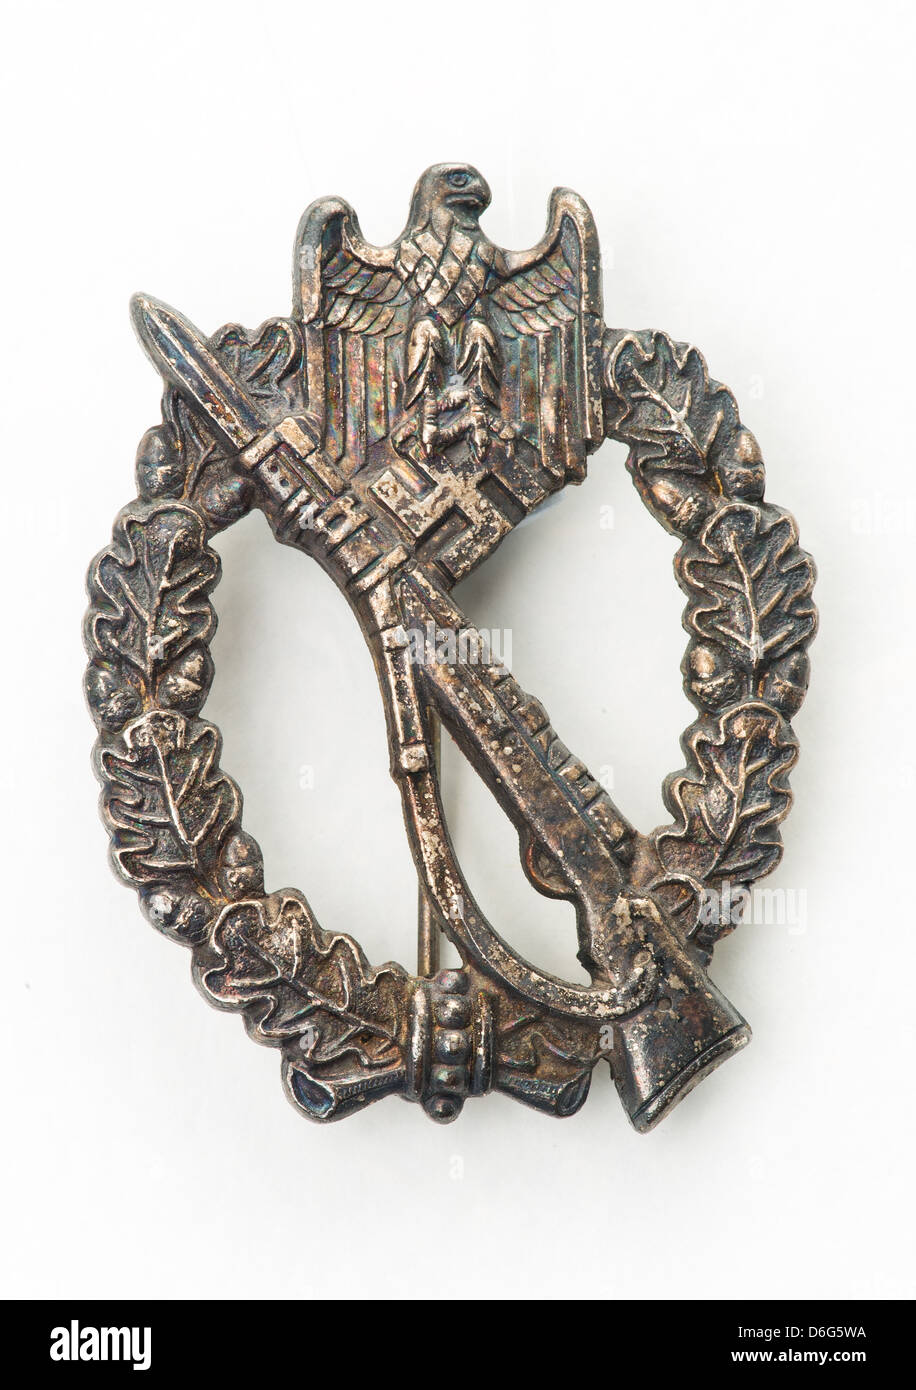 A Nazi Germany Infantry badge - studio shot with a white background Stock Photo